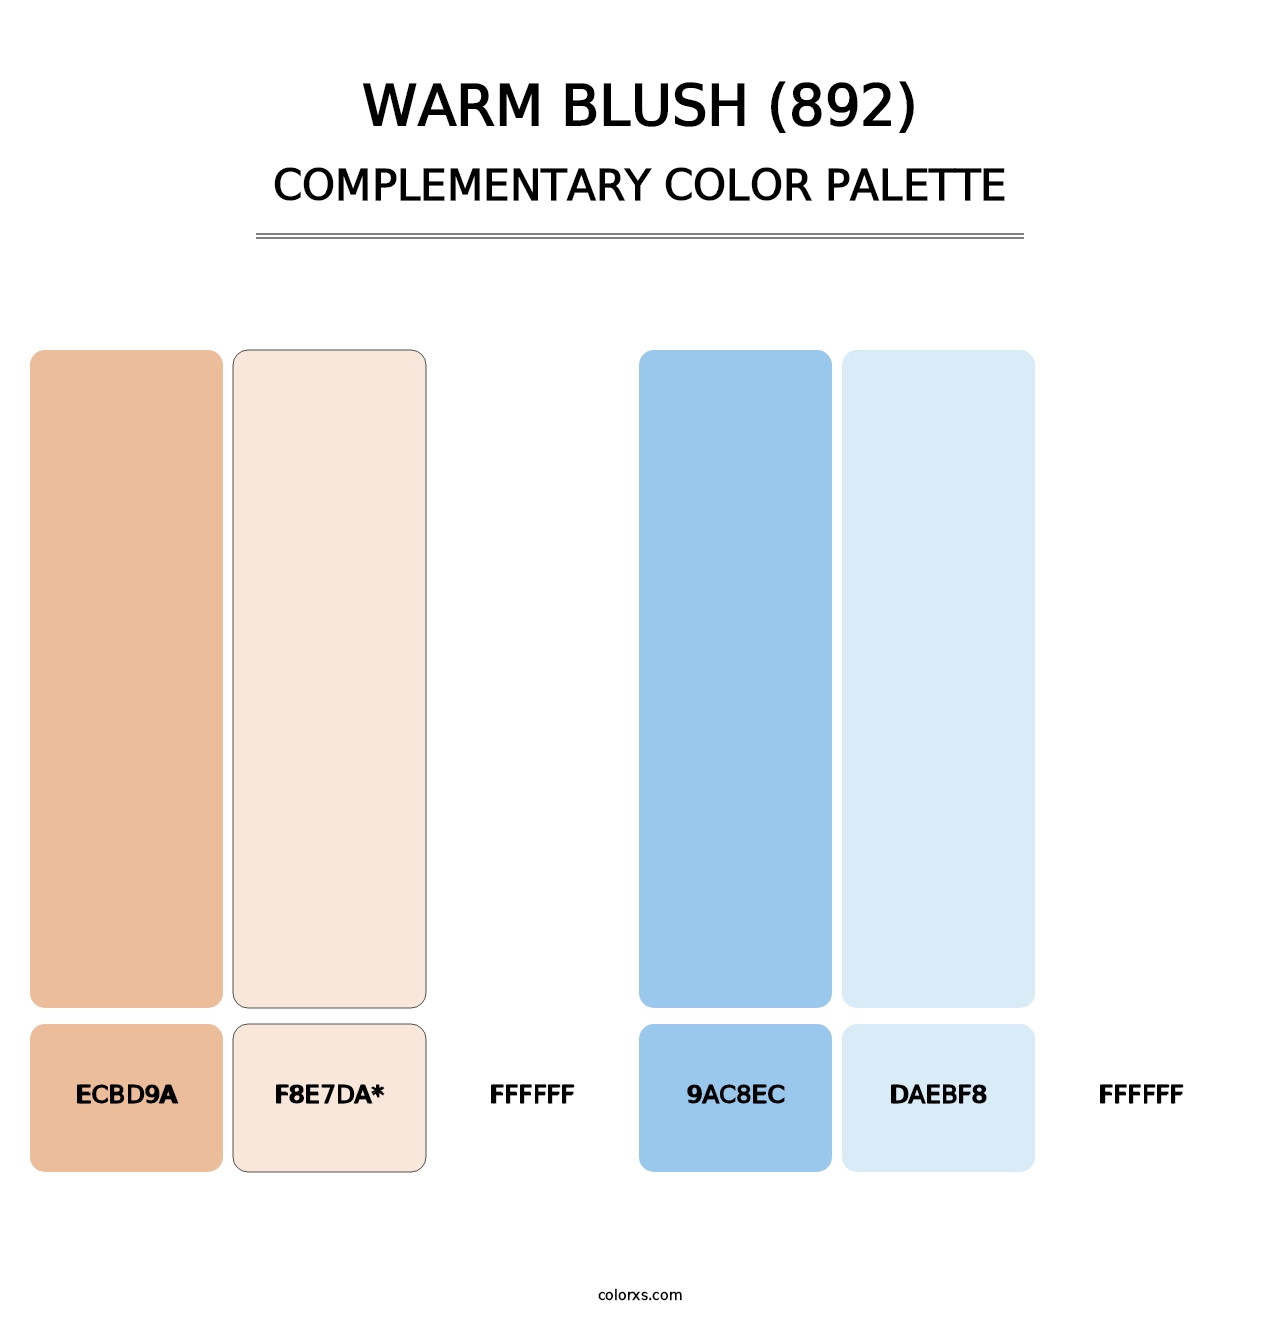 Warm Blush (892) - Complementary Color Palette